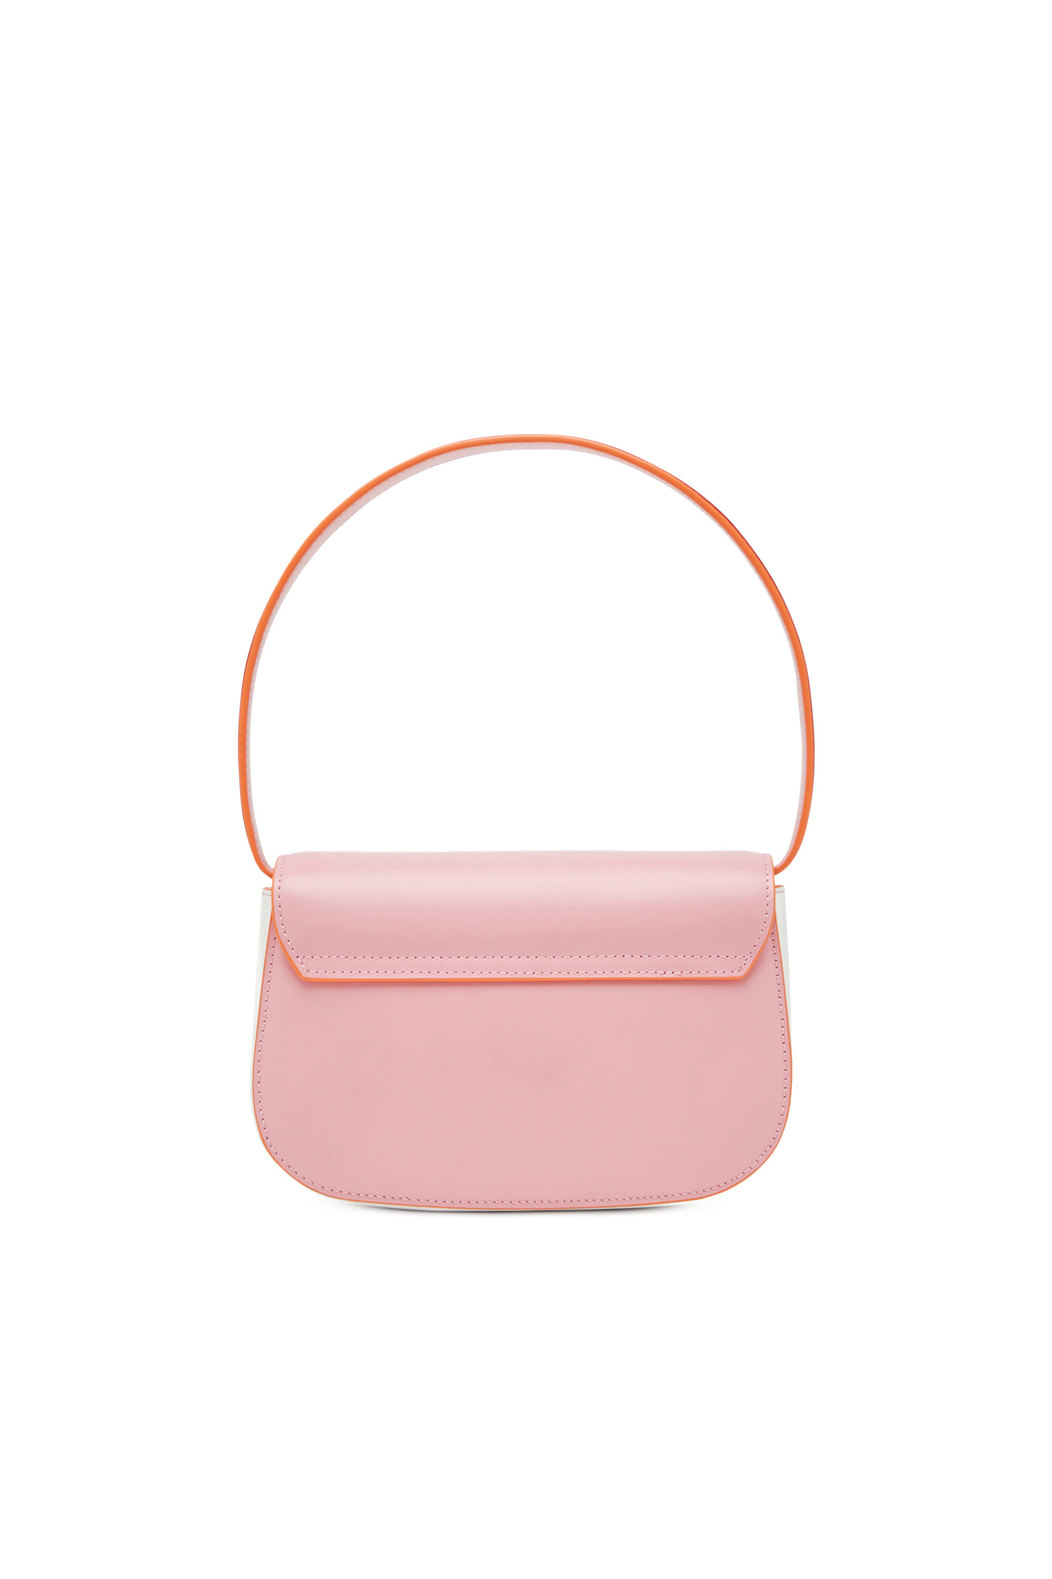 1DR - Iconic shoulder bag in nappa leather